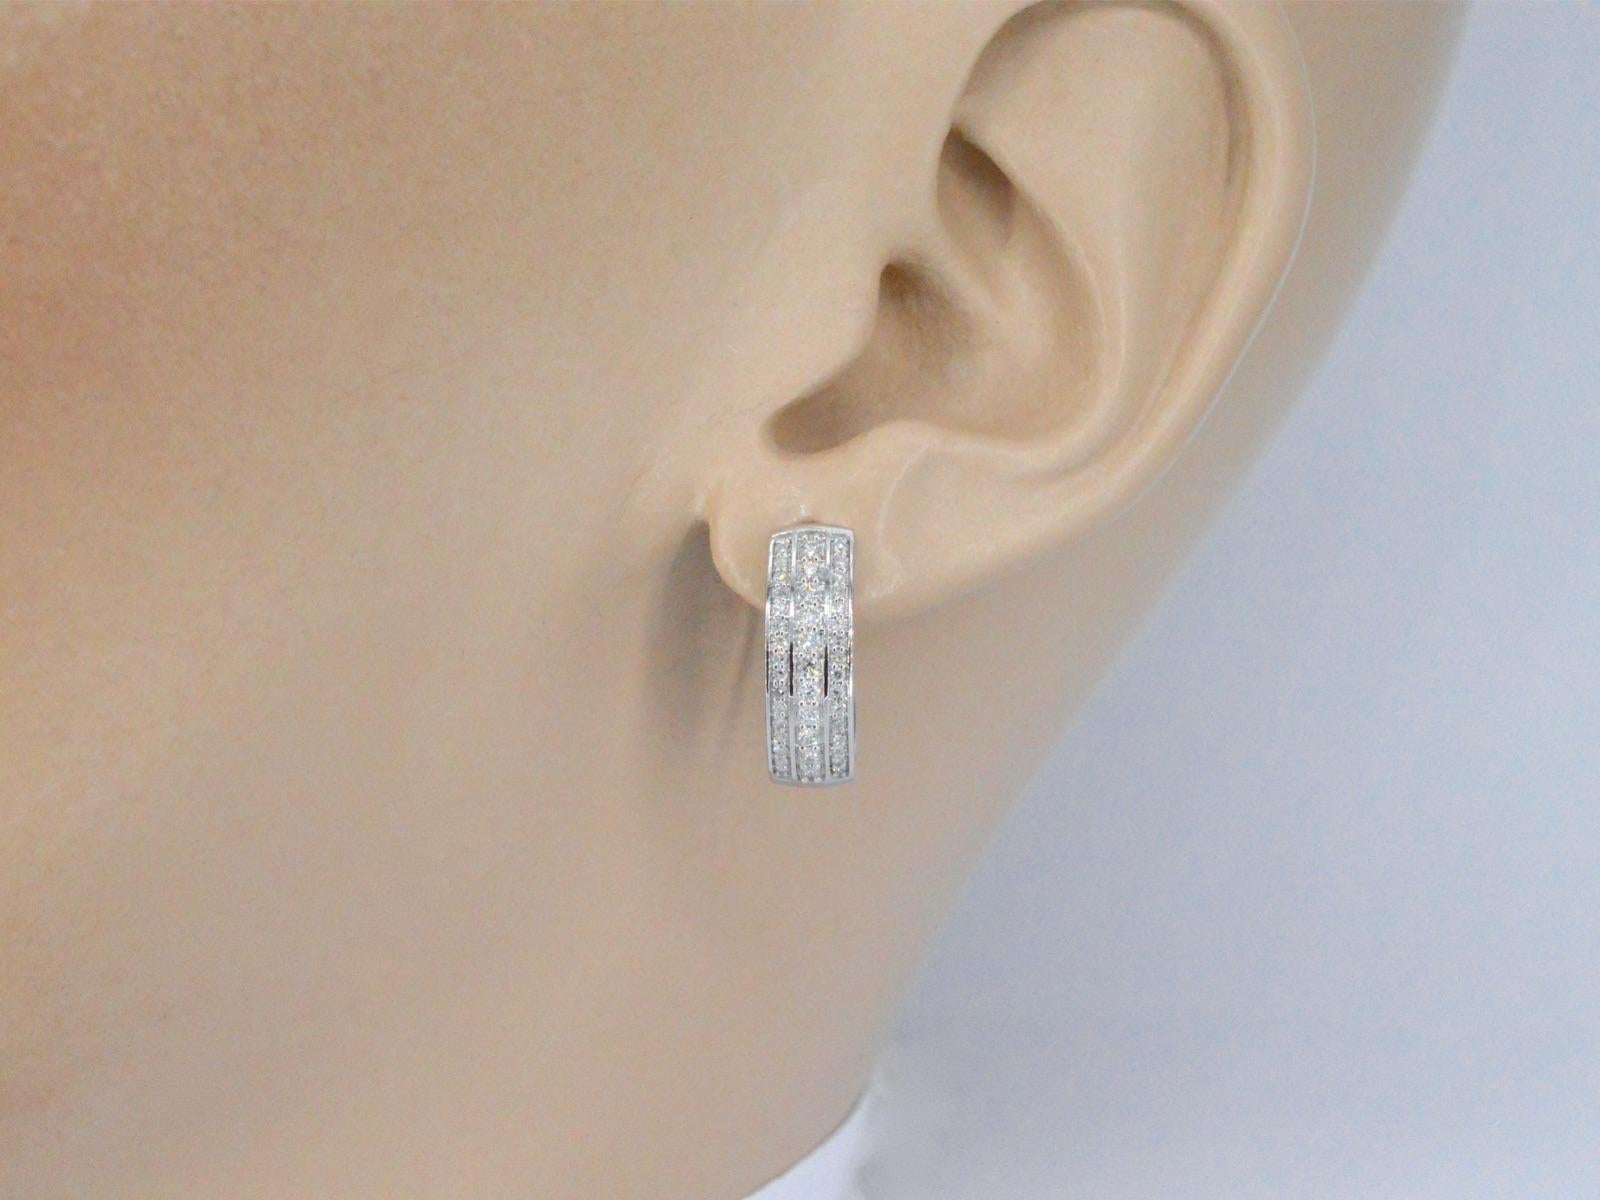 White gold earrings with brilliant cut diamonds are a classic and sophisticated piece of jewelry that can be worn for any occasion. The earrings are made of white gold, a popular choice for its durability and timeless appeal, and feature diamonds